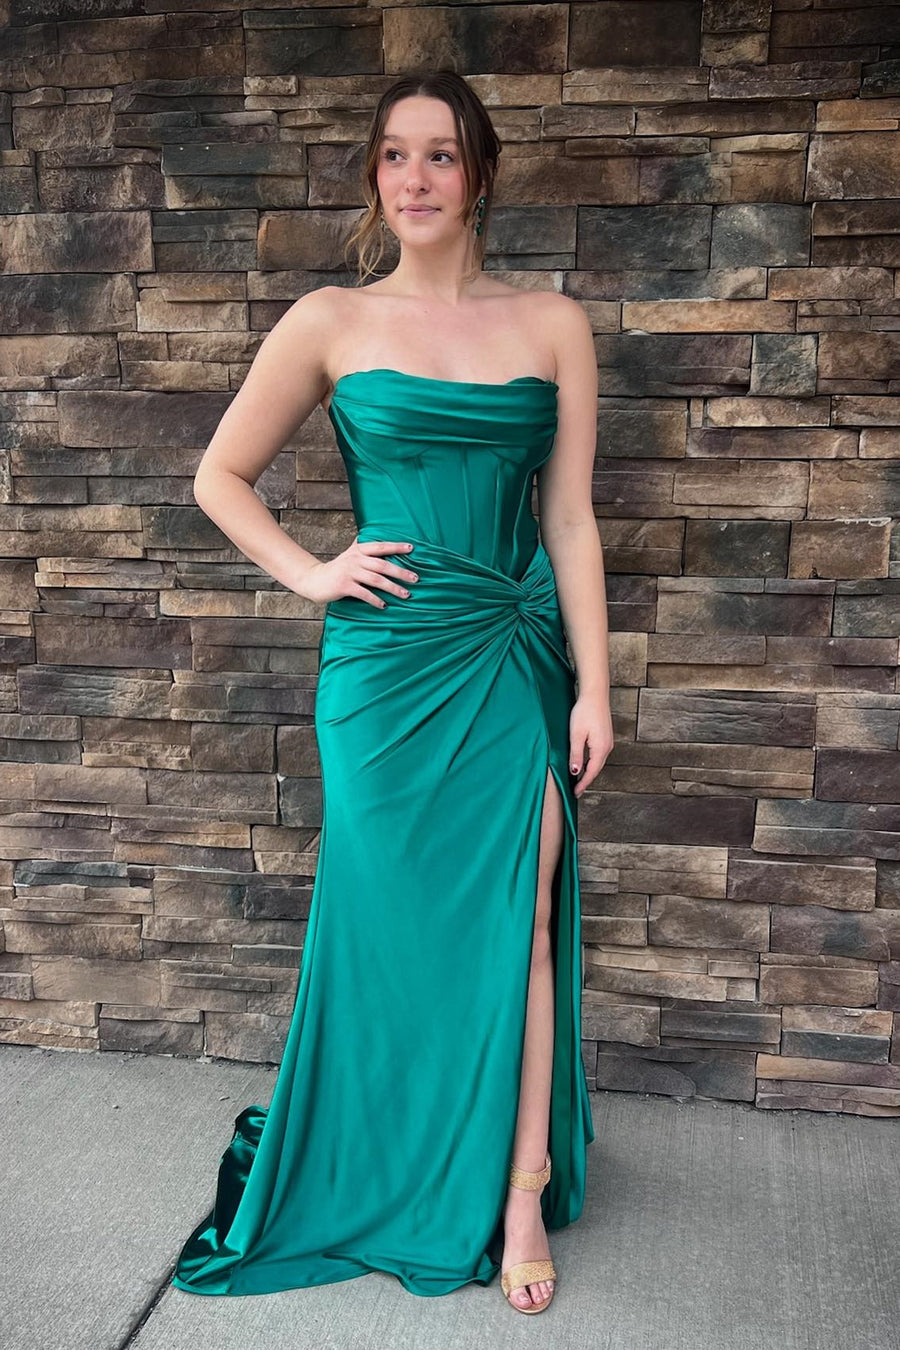 Blue Ruched Strapless Mermaid Long Prom Dress